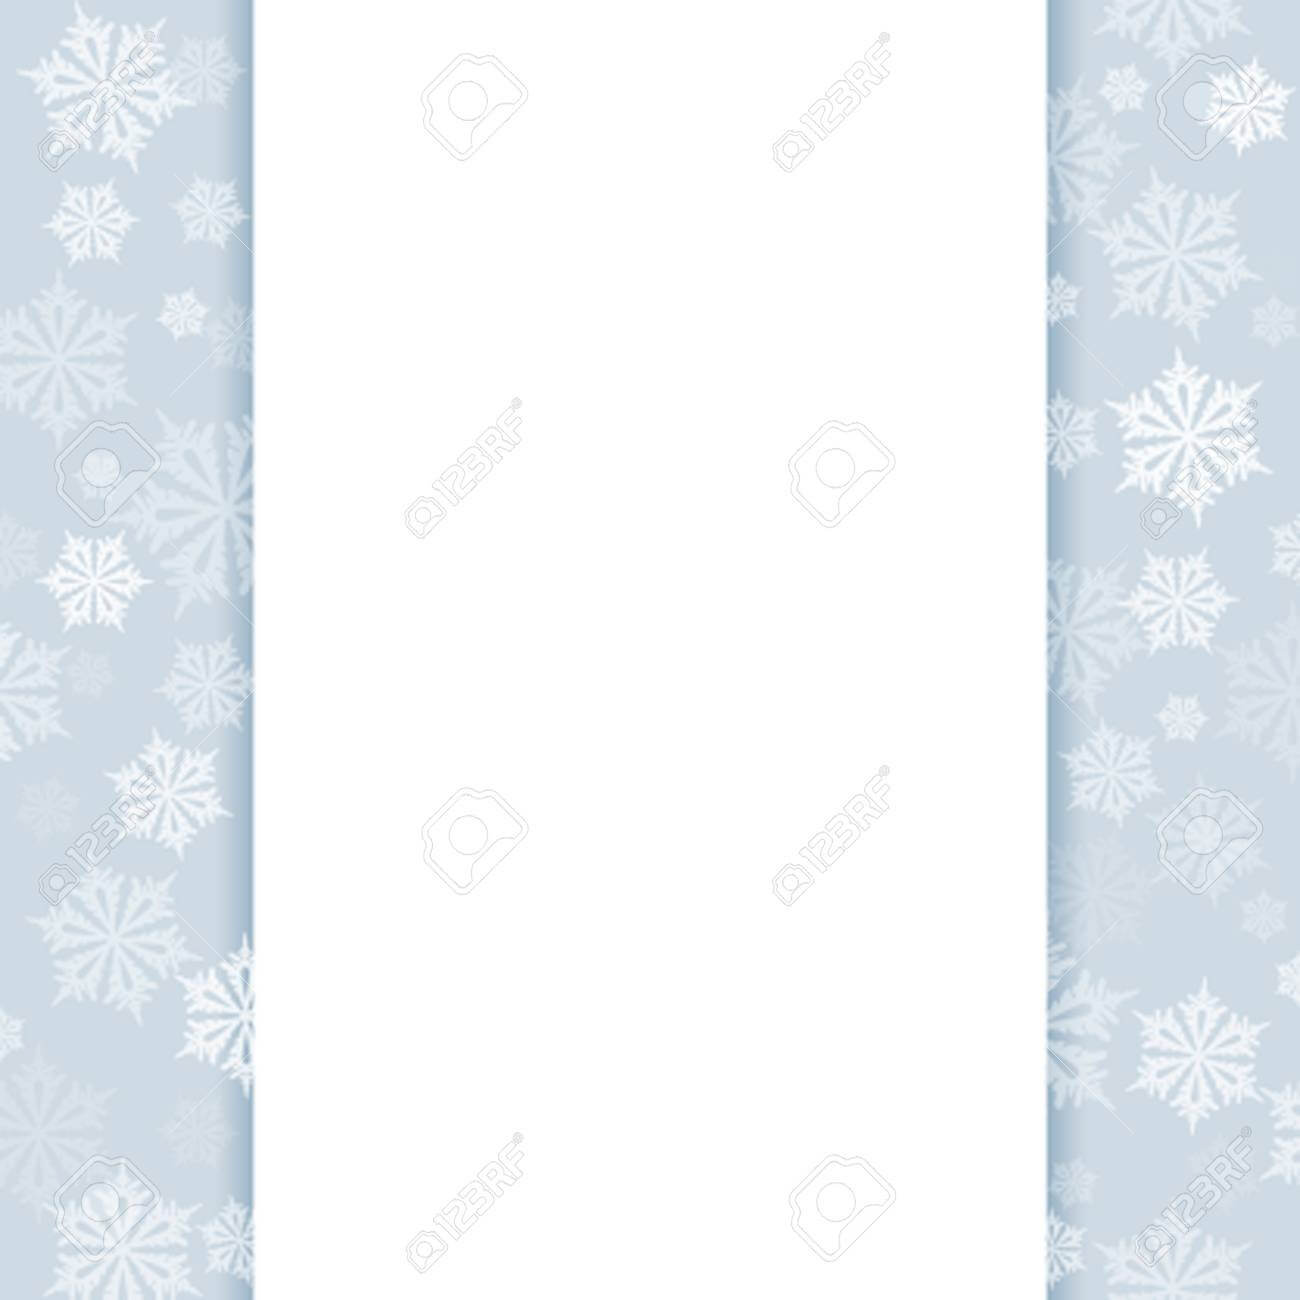 Blank Christmas Card Or A Letter To Santa. A Brochure Template.. Inside Blank Snowflake Template